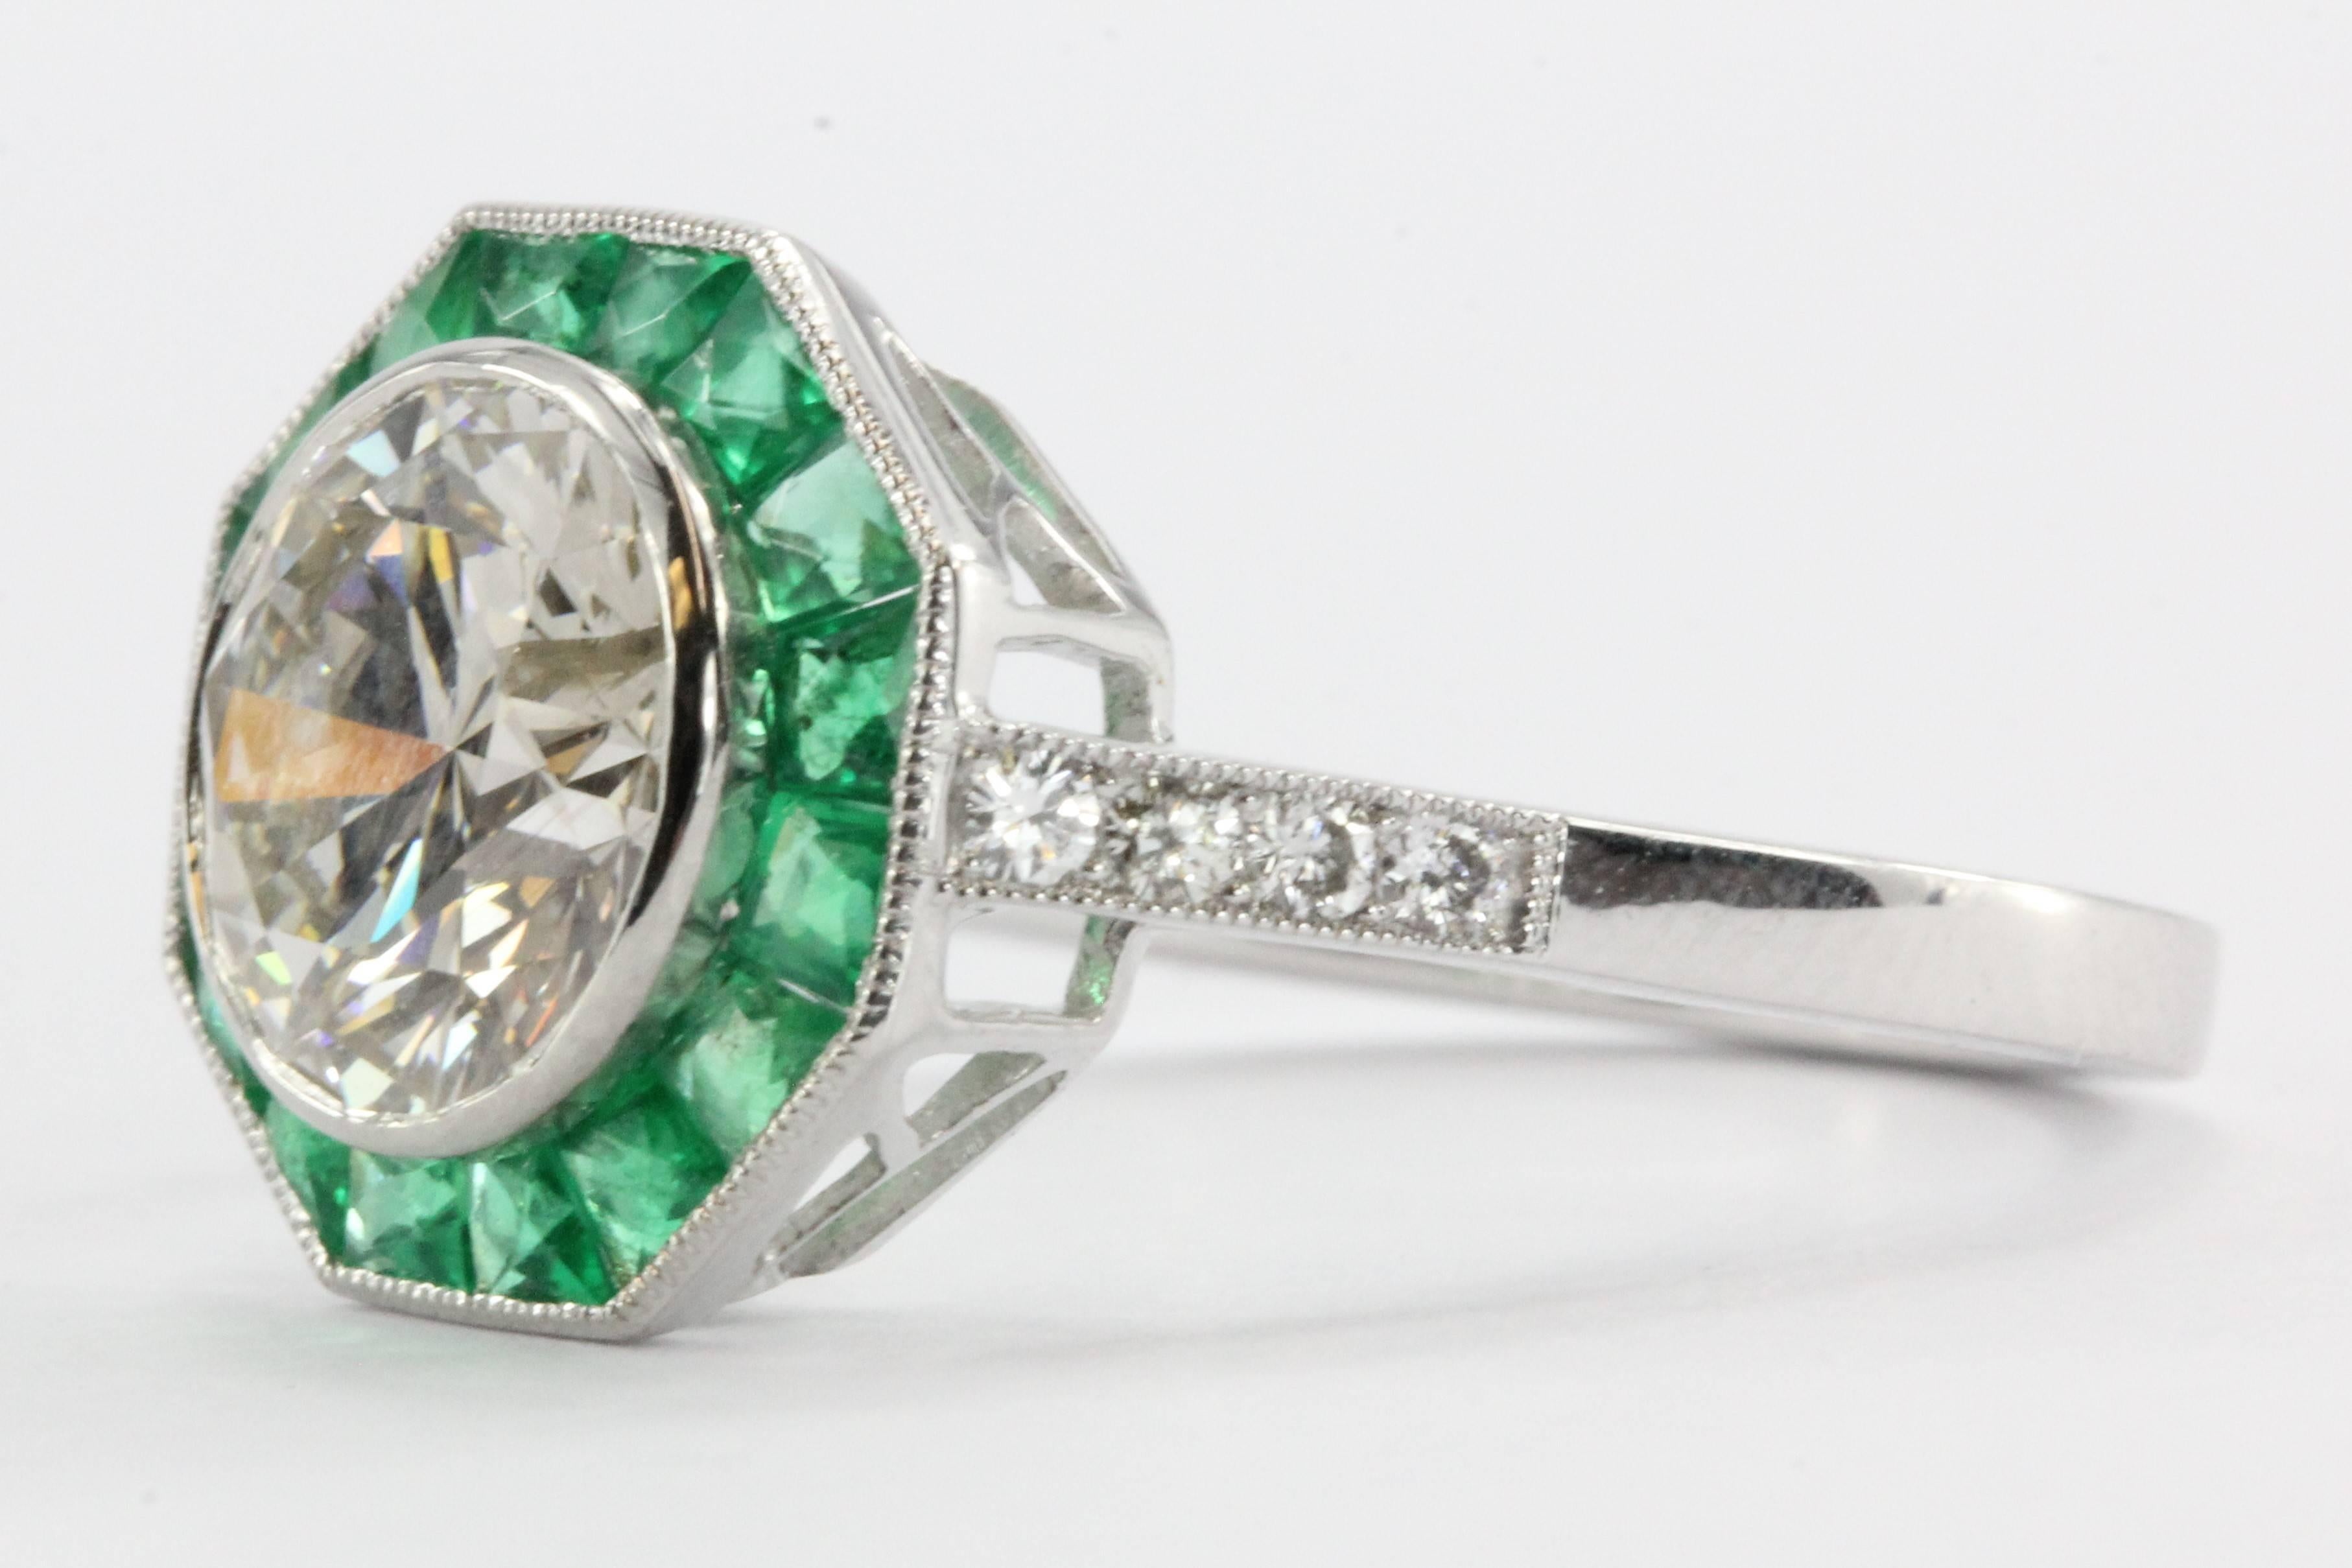 Art Deco style, vintage inspired platinum set diamond and emerald engagement ring by Sophia D. The is new and has never been worn before. The center stone is a approximately 2.1 carats and conservative L color  and Si2 clarity. It is framed with a